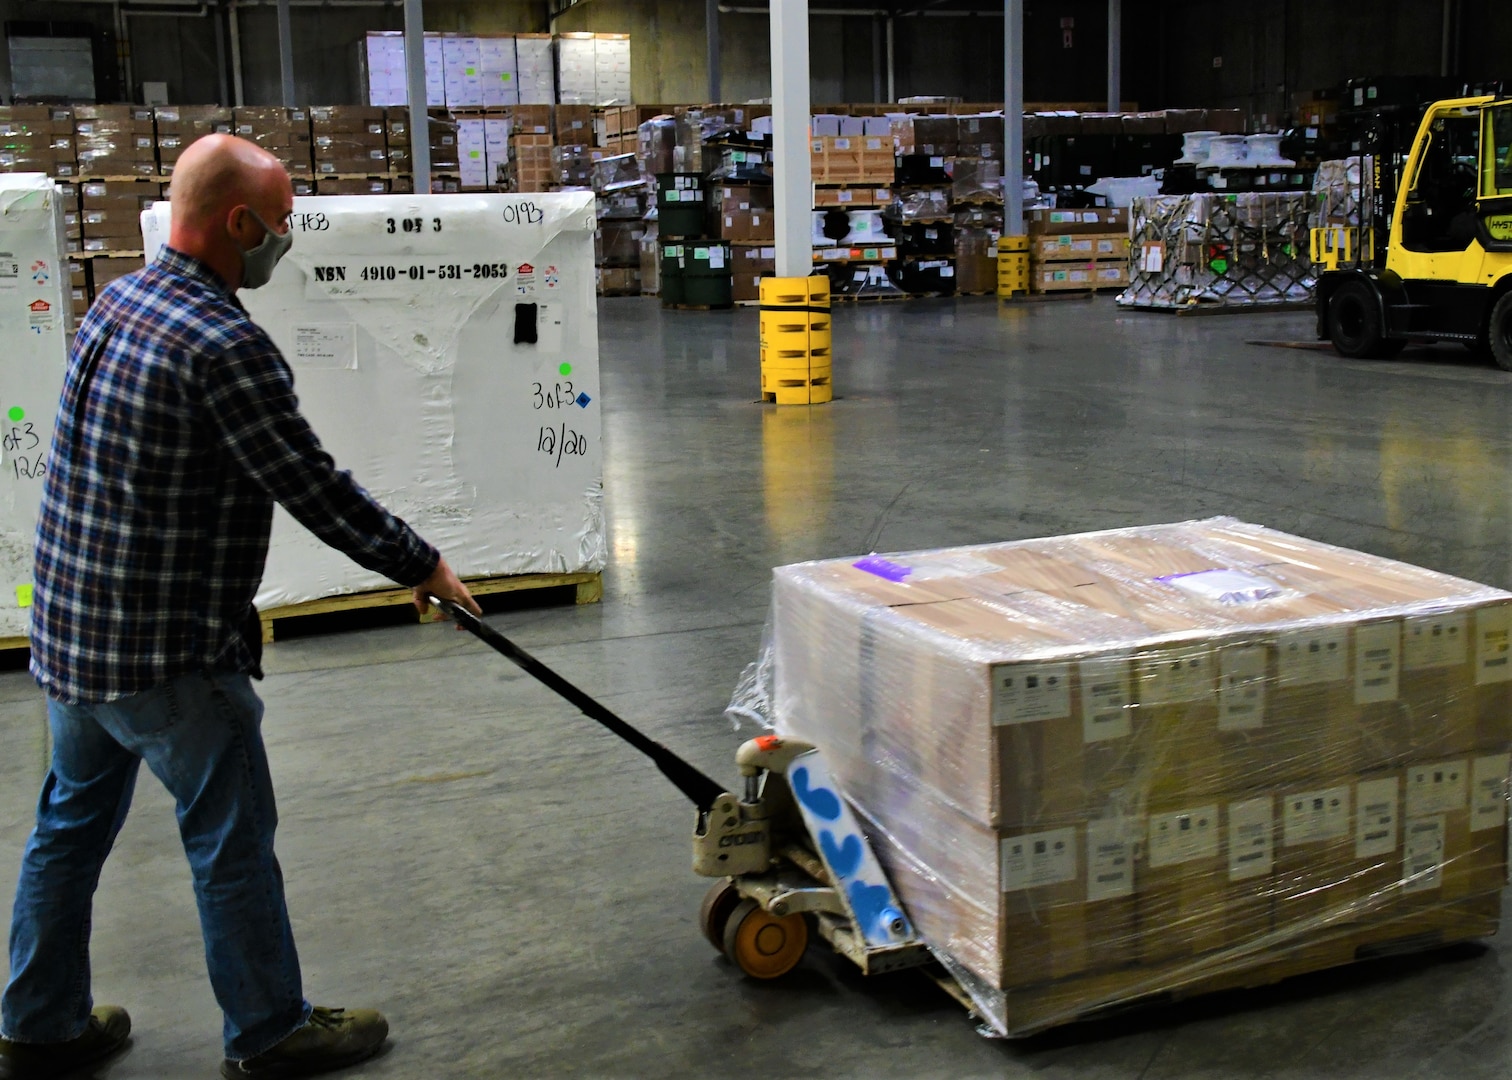 Chris Orth, a production control worker at Defense Logistics Agency Susquehanna in New Cumberland, Pennsylvania, transports the initial shipment of children’s cloth masks April 9, 2021, as part of a White House effort to deliver 25 million masks to food banks and community health centers.